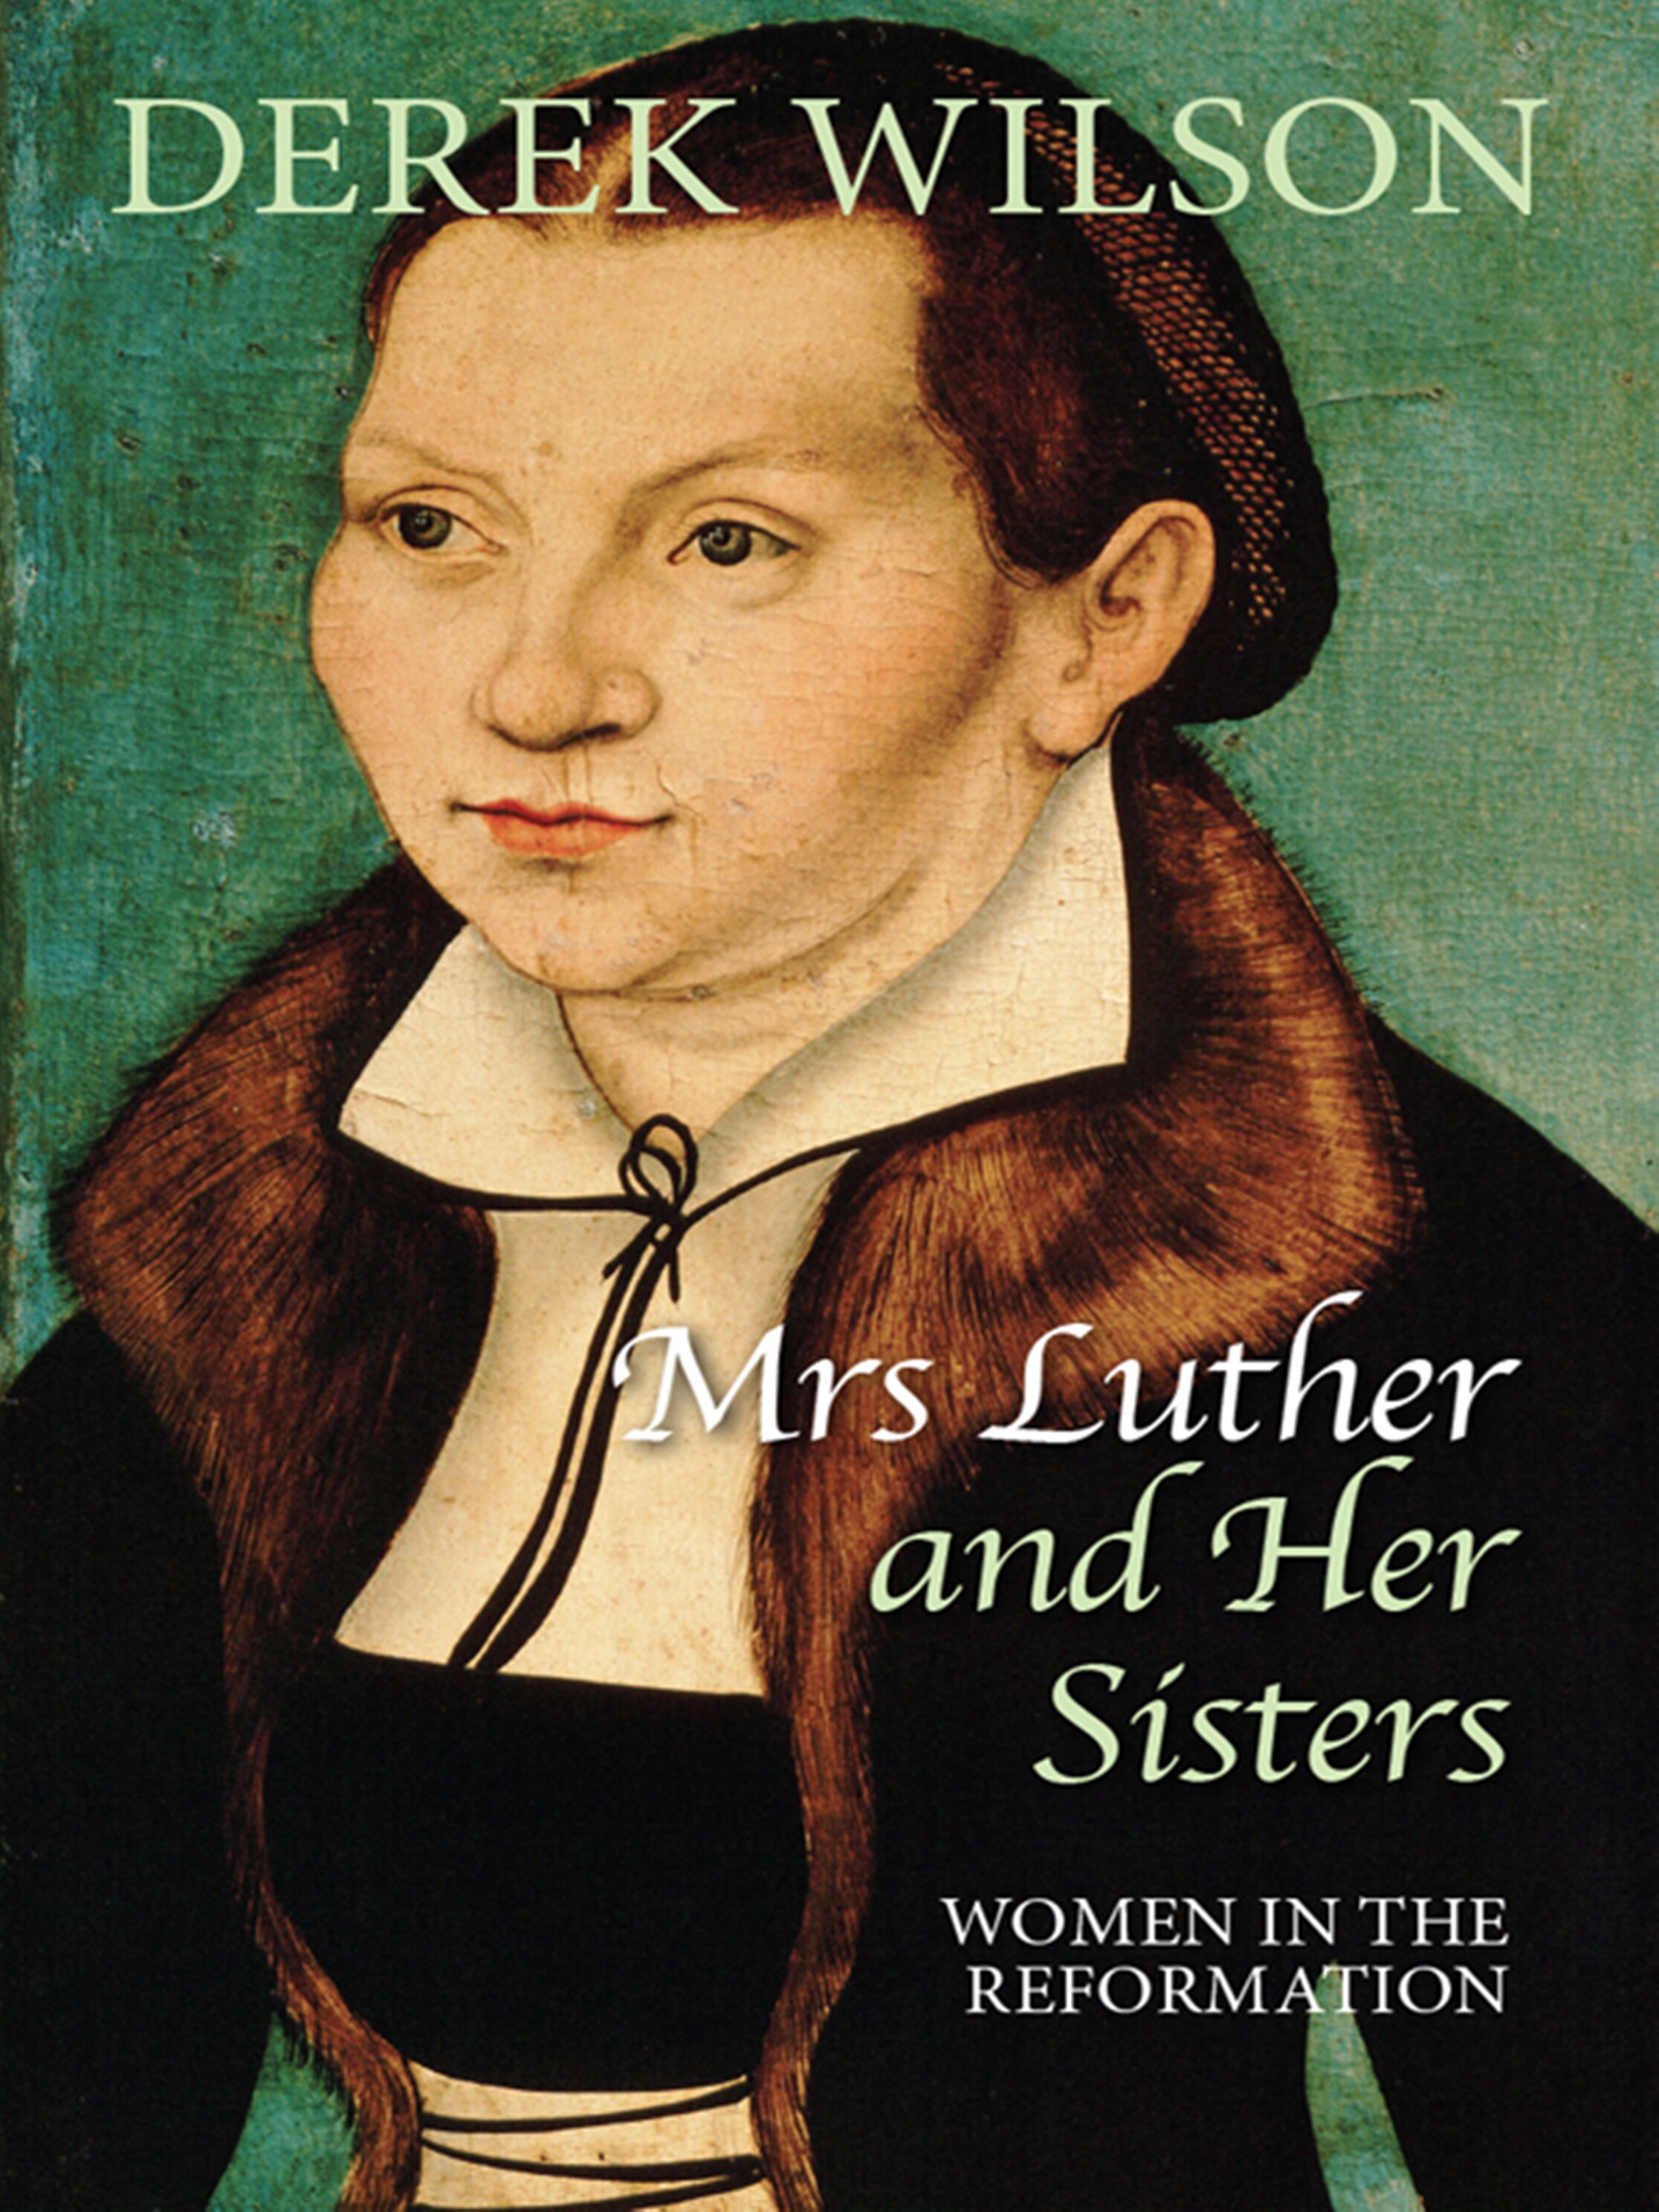 Mrs Luther and her sisters: Women in the Reformation